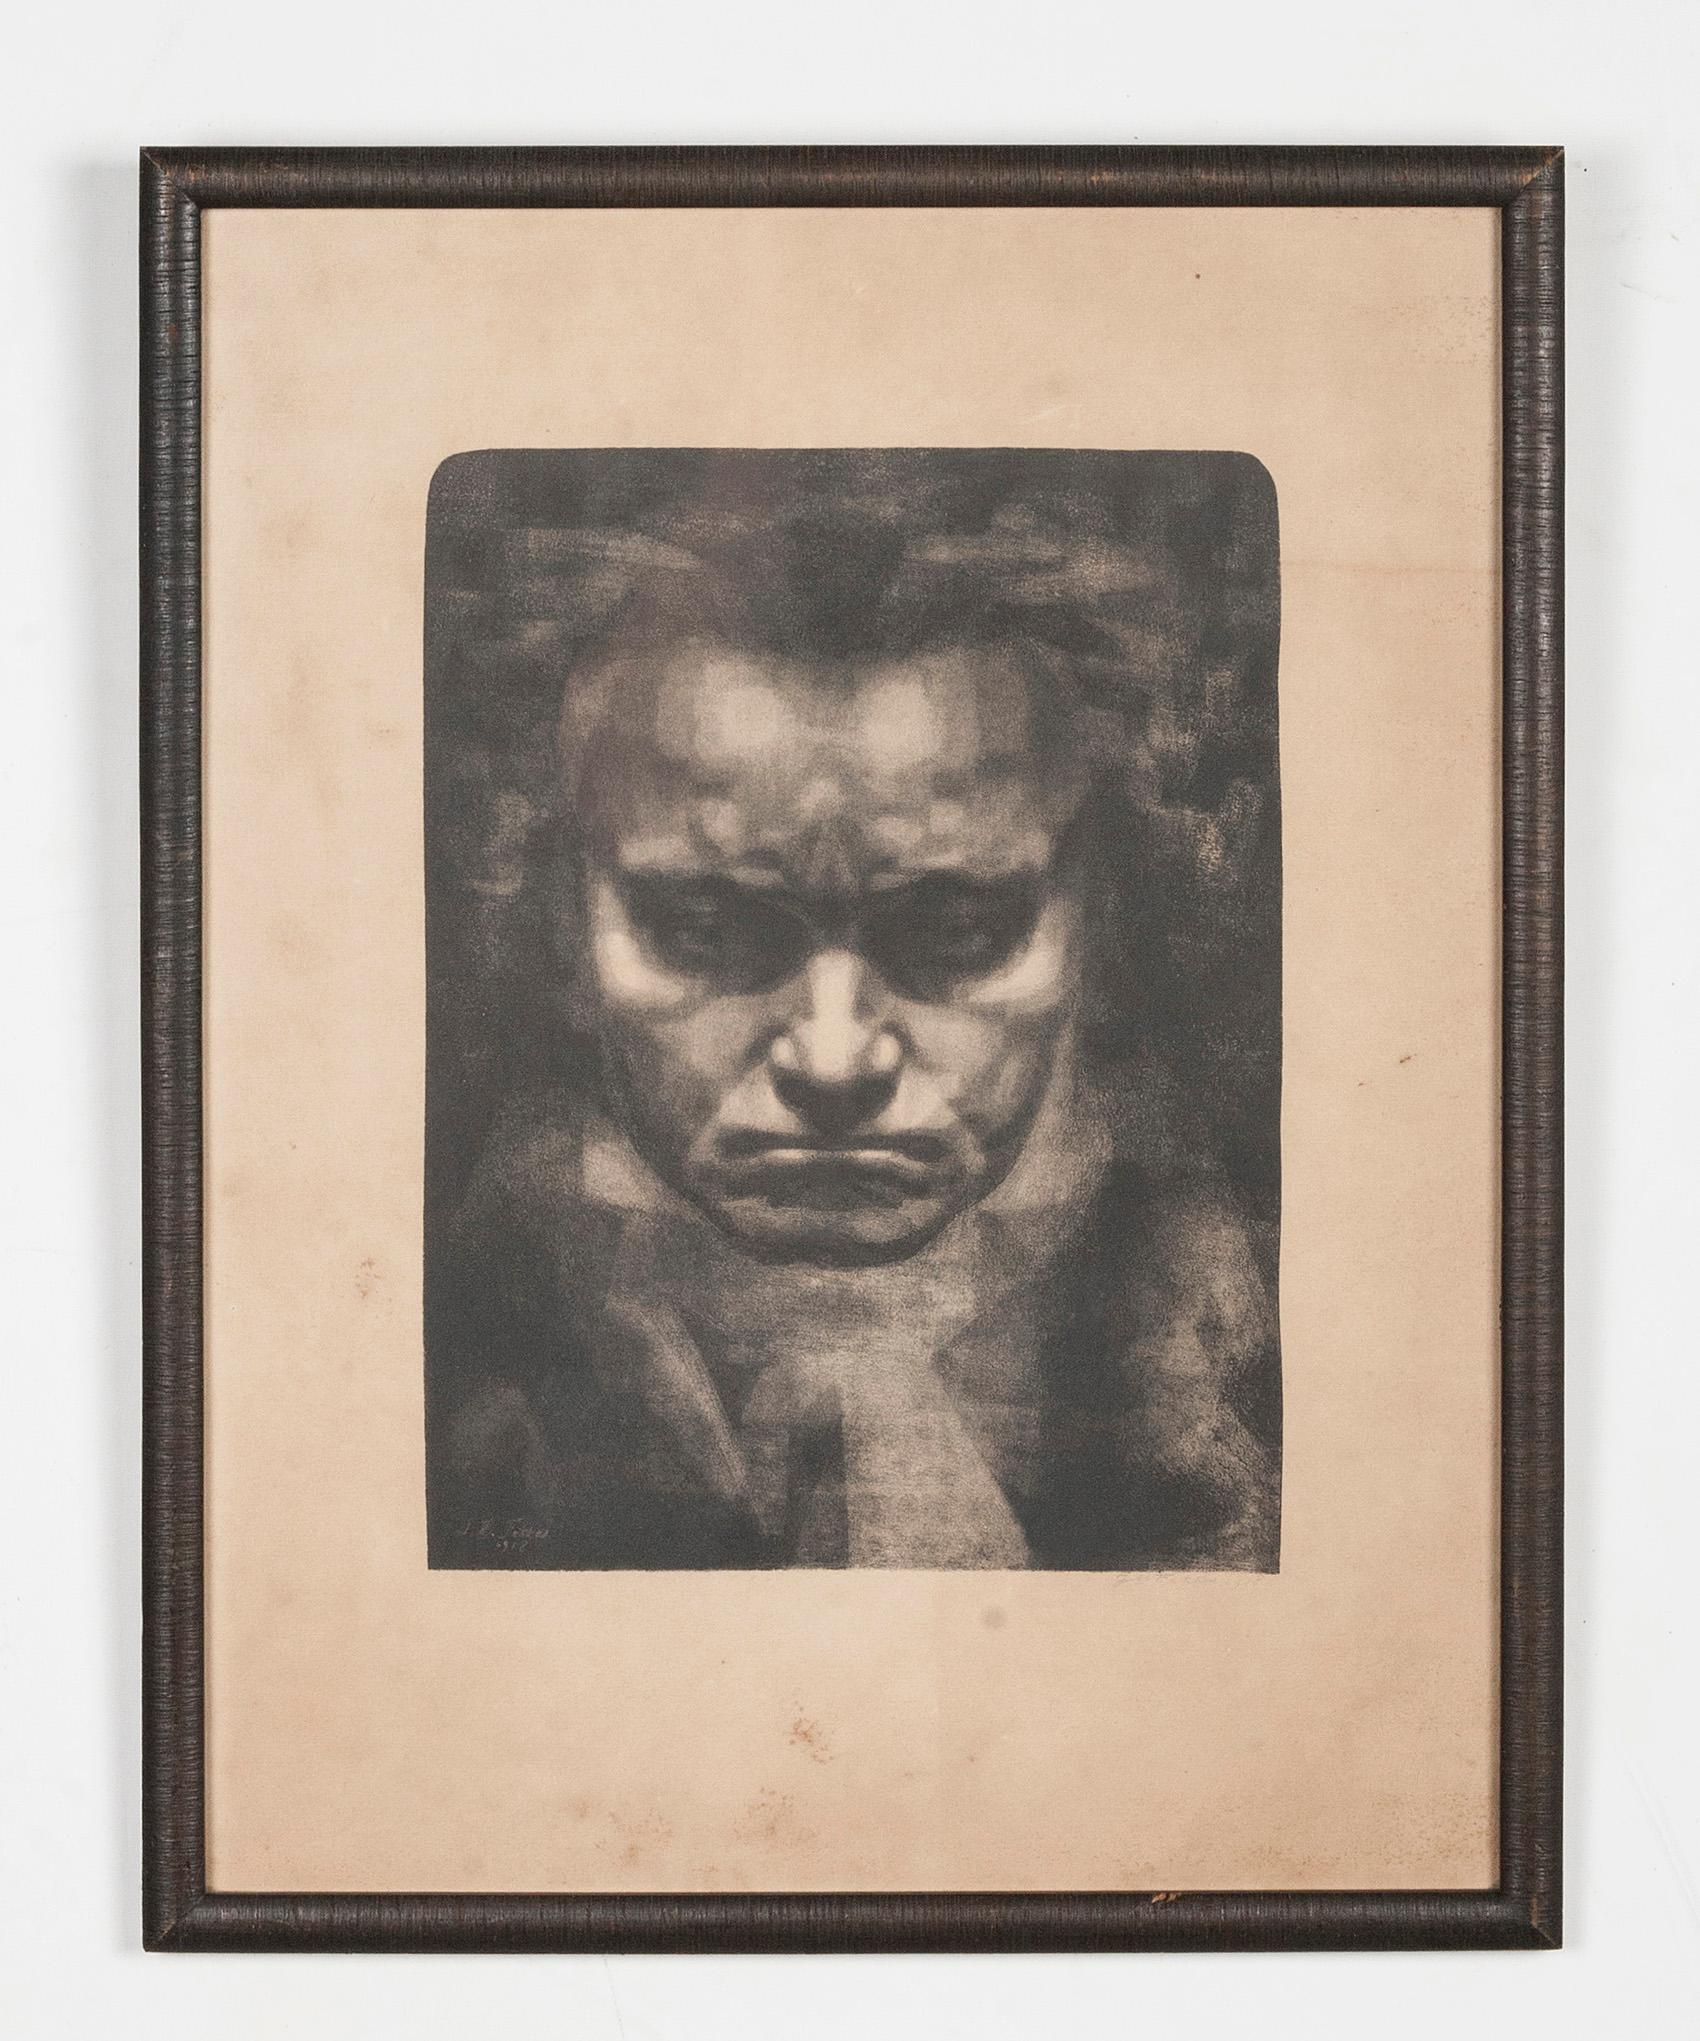 Etching from the beginning of the 20th century, depicting Beethoven. Made by Jan Fekkes.Jan Fekkes were a Dutch lithographer, etcher, painter and draftsman. He lived from 1885-1933.
The portrait stands out due to the dark, penetrating gaze of the